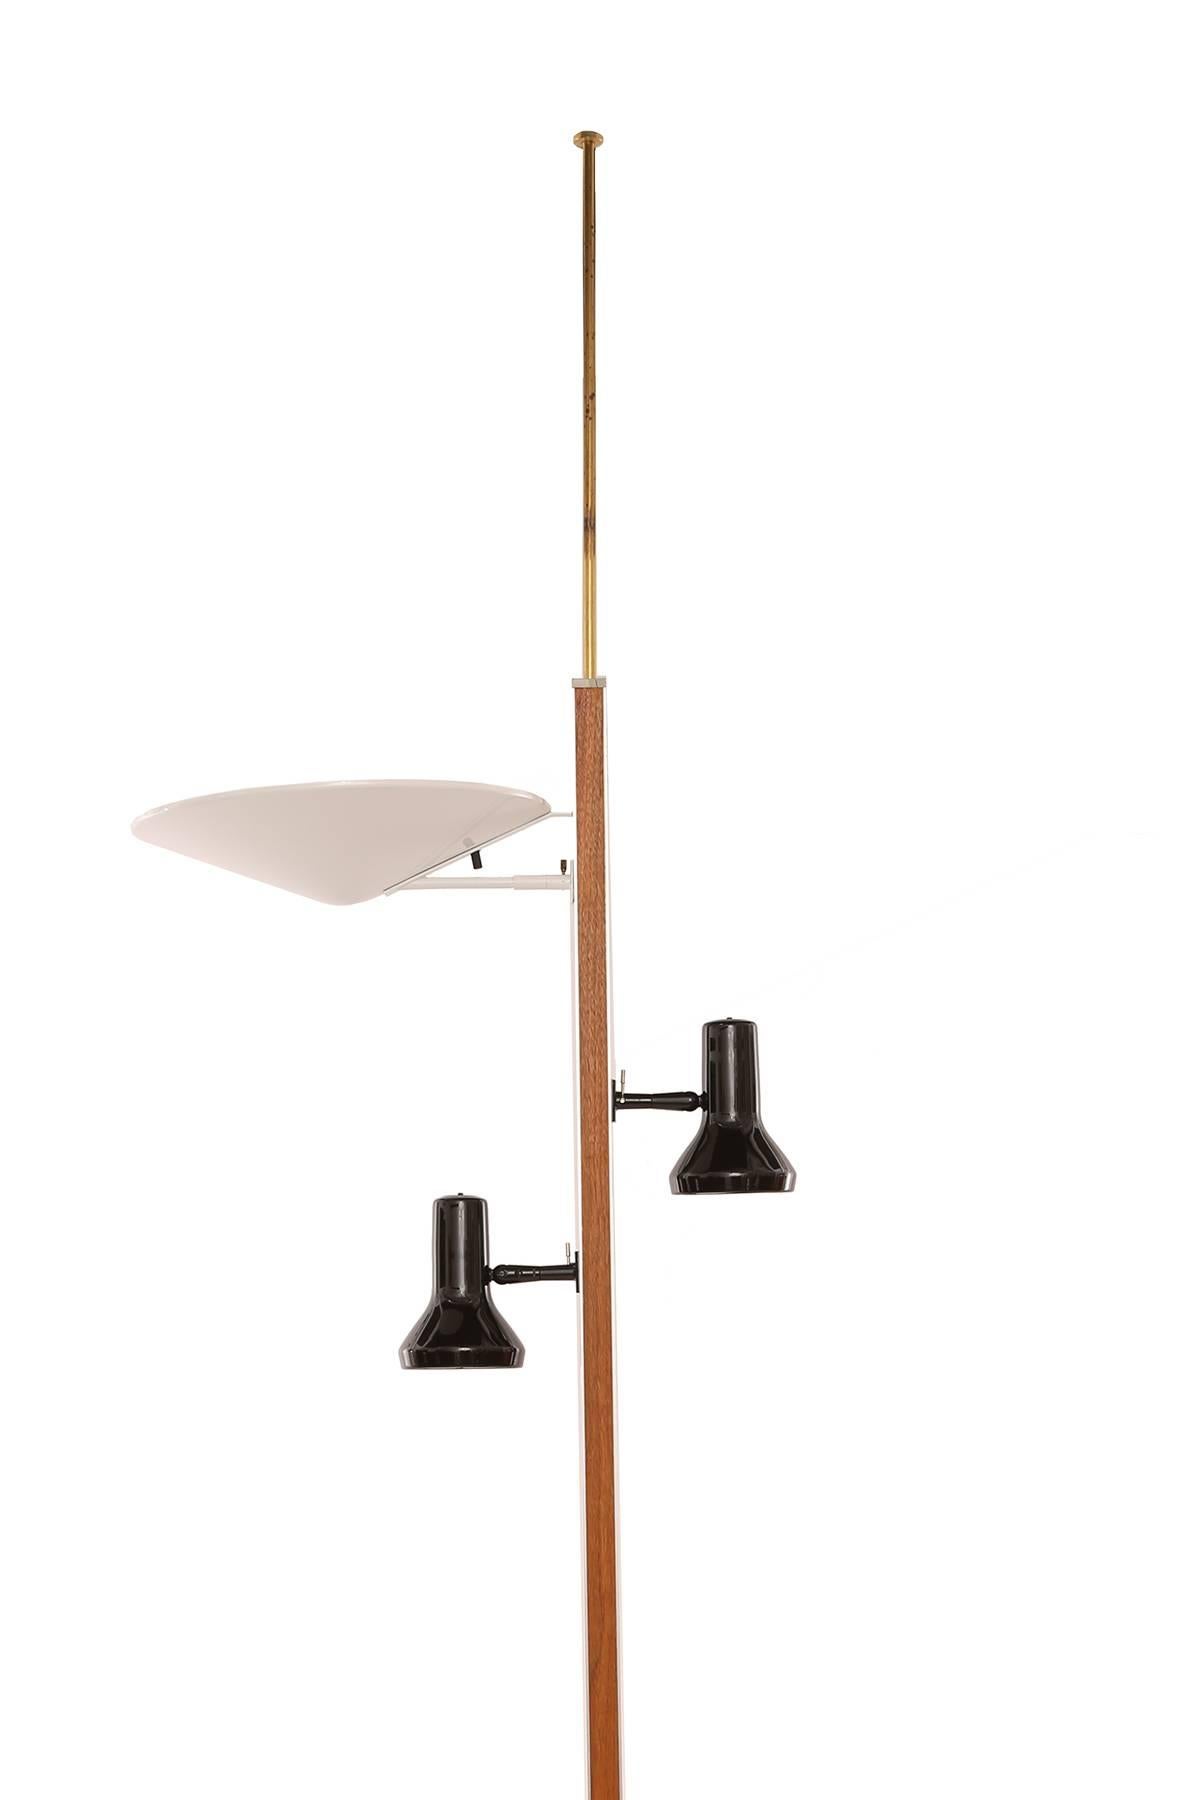 Gerald Thurston for Lightolier Pole lamp, circa early 1960s. This example has a walnut and anodized aluminium pole, white enameled dome light and two black enameled spots. It has been newly finished and wired. Extends from 79